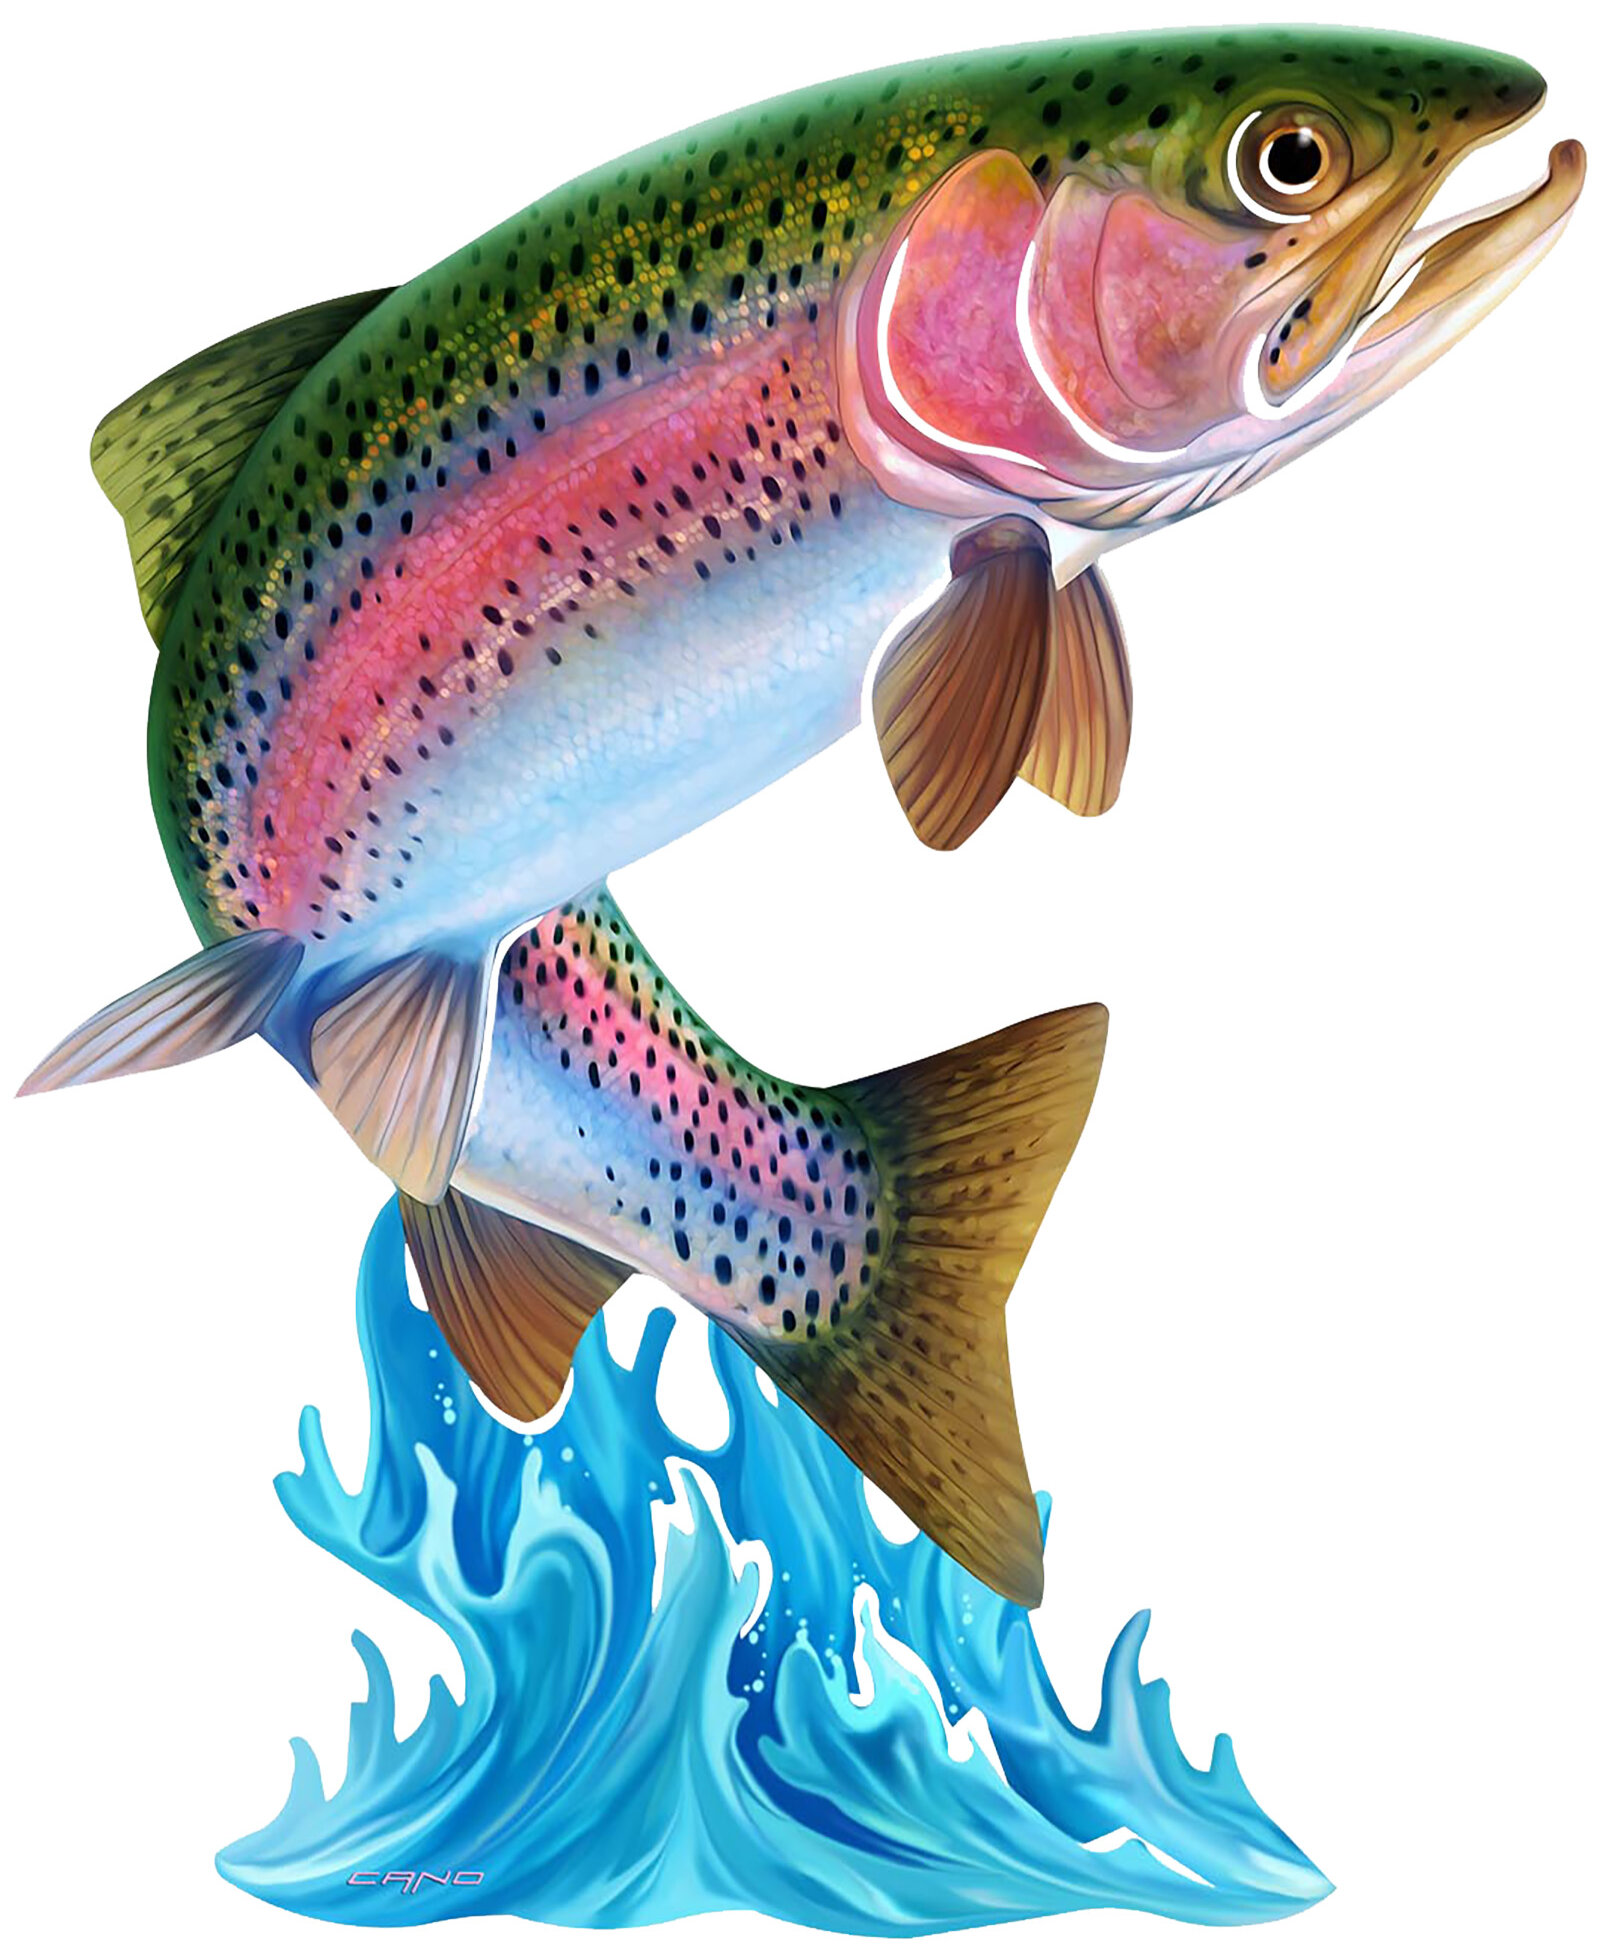 Highland Dunes Fish Hooks, Perch, Large Mouth Bass And Rainbow Trout Poster  Framed On Paper by Jean Plout Print & Reviews - Wayfair Canada